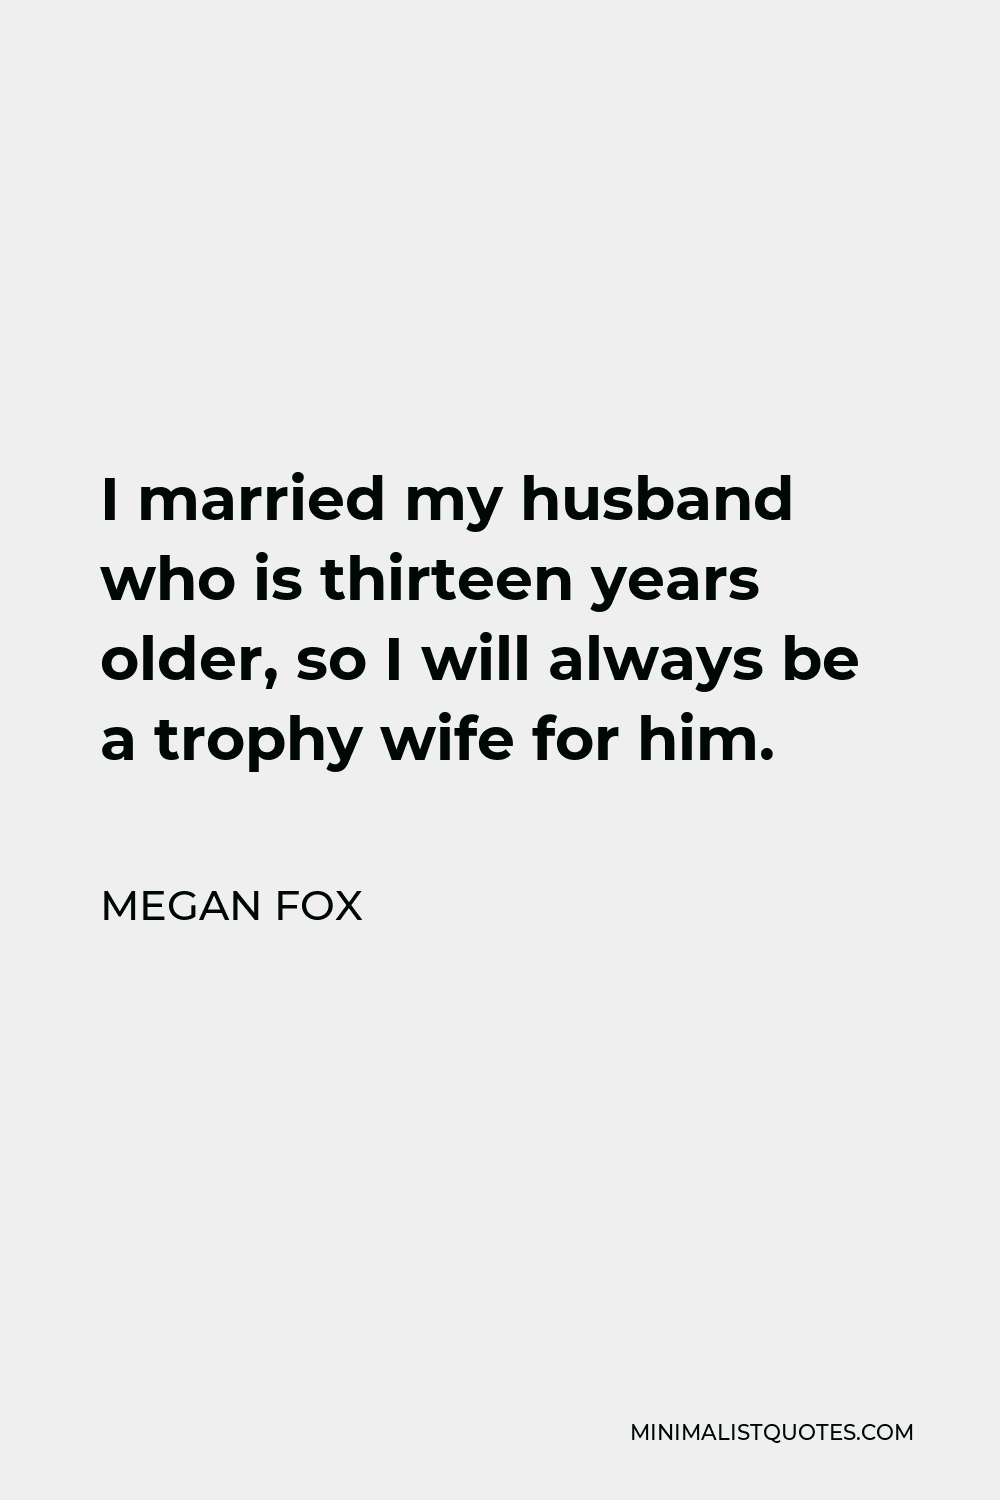 Megan Fox Quote - I married my husband who is thirteen years older, so I will always be a trophy wife for him.